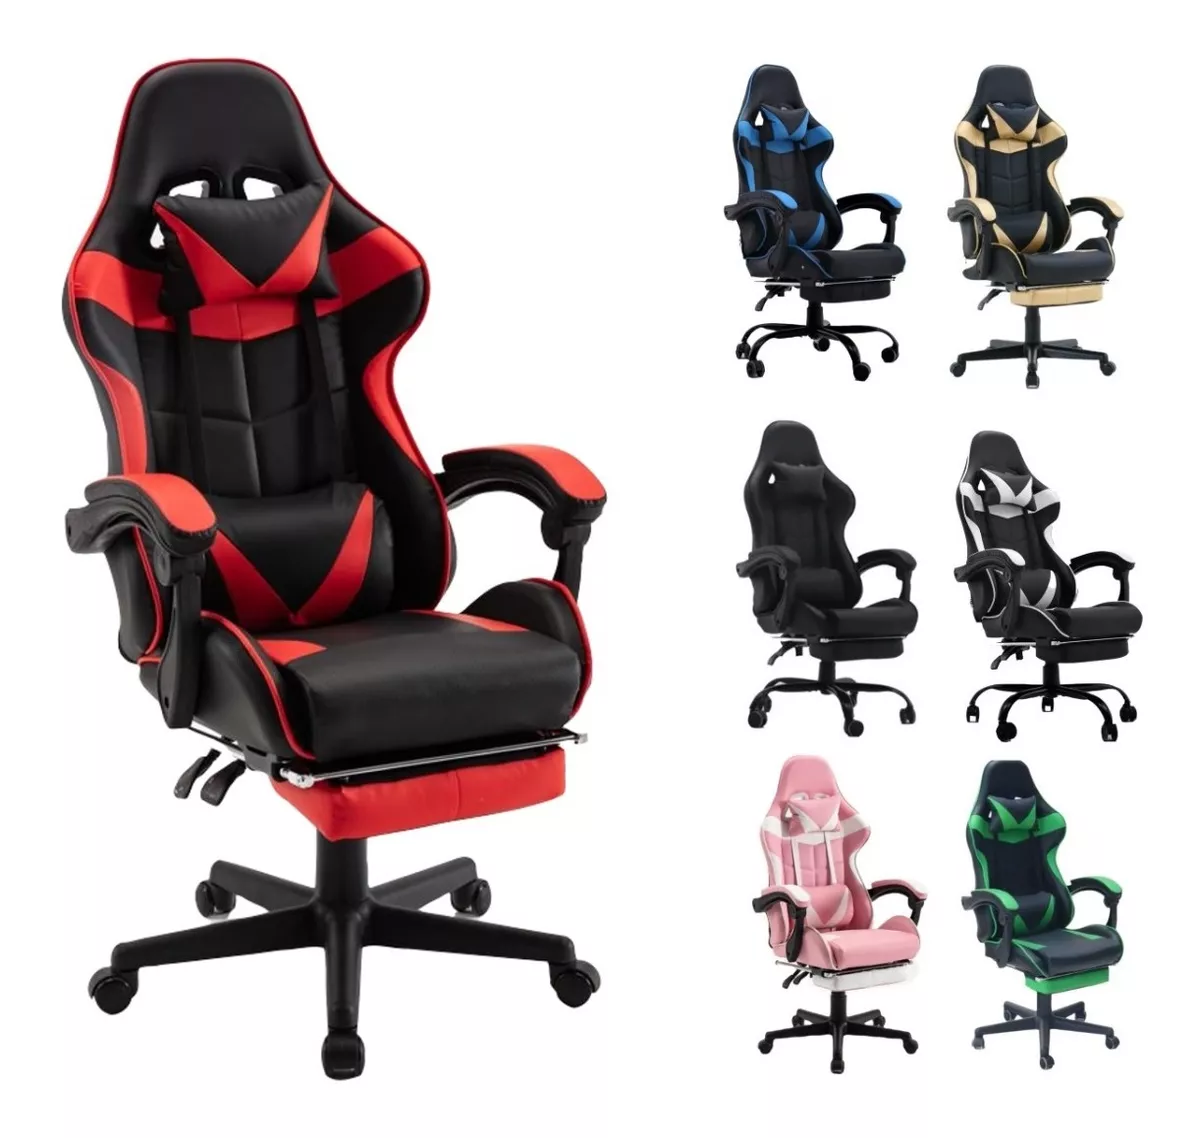 Silla Home Office  Gamer Reclinable